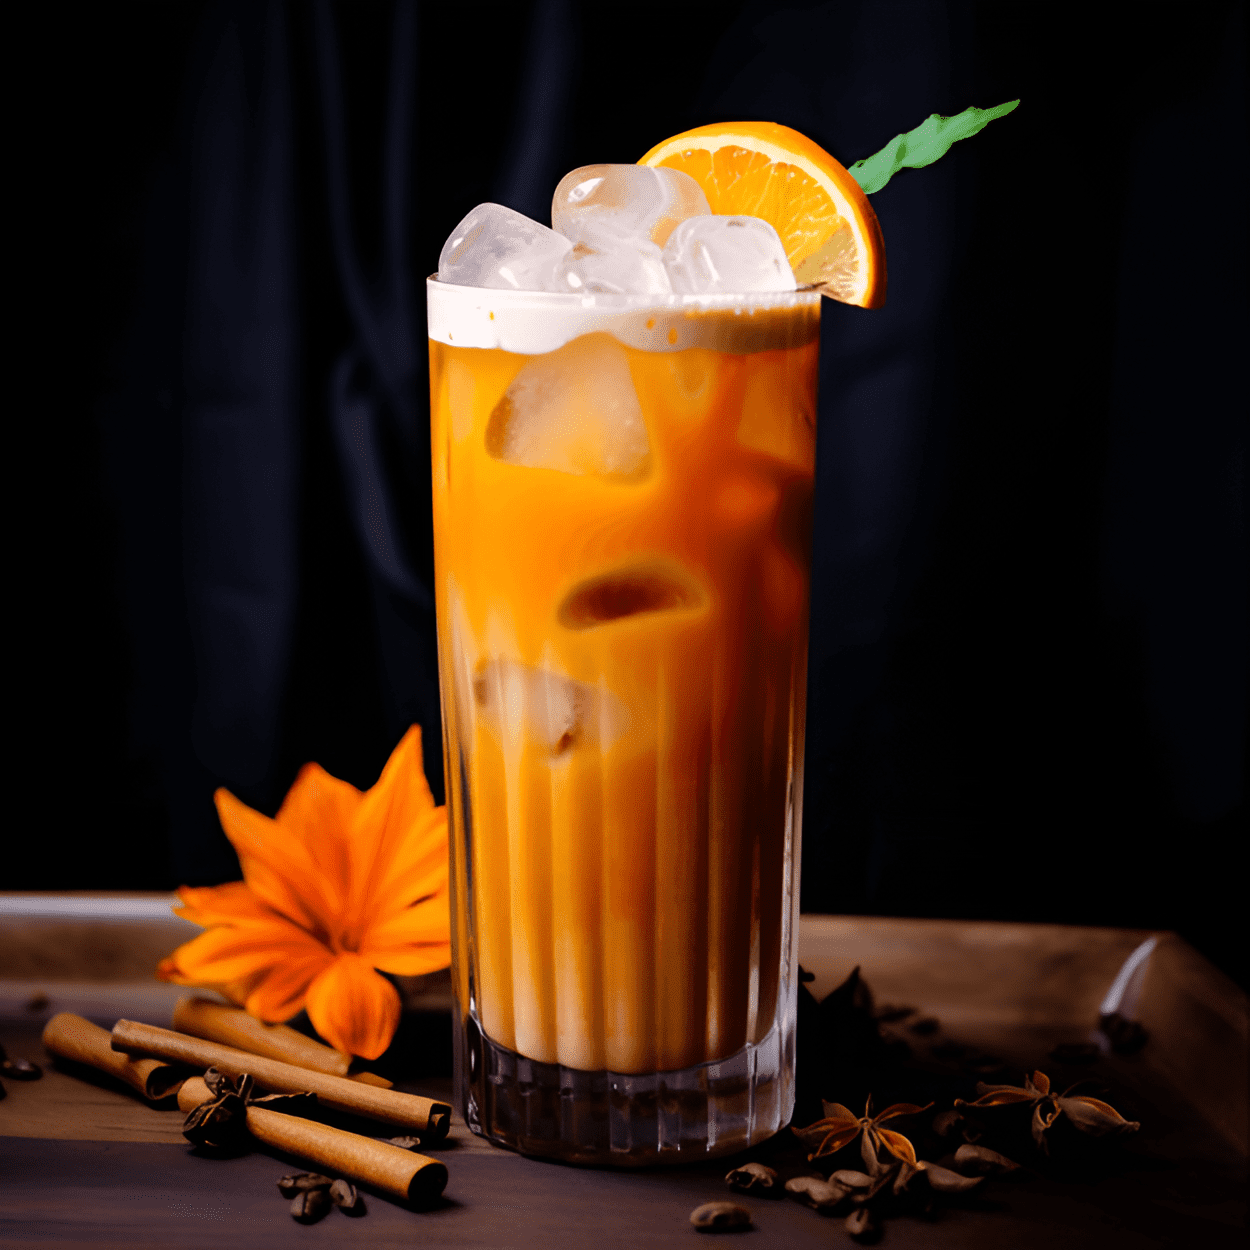 This Thai Tea cocktail has a unique, sweet, and creamy taste with a hint of spiciness from the spices. The strong tea flavor is balanced by the sweetness of the condensed milk and the smoothness of the alcohol, making it a delightful and refreshing drink.